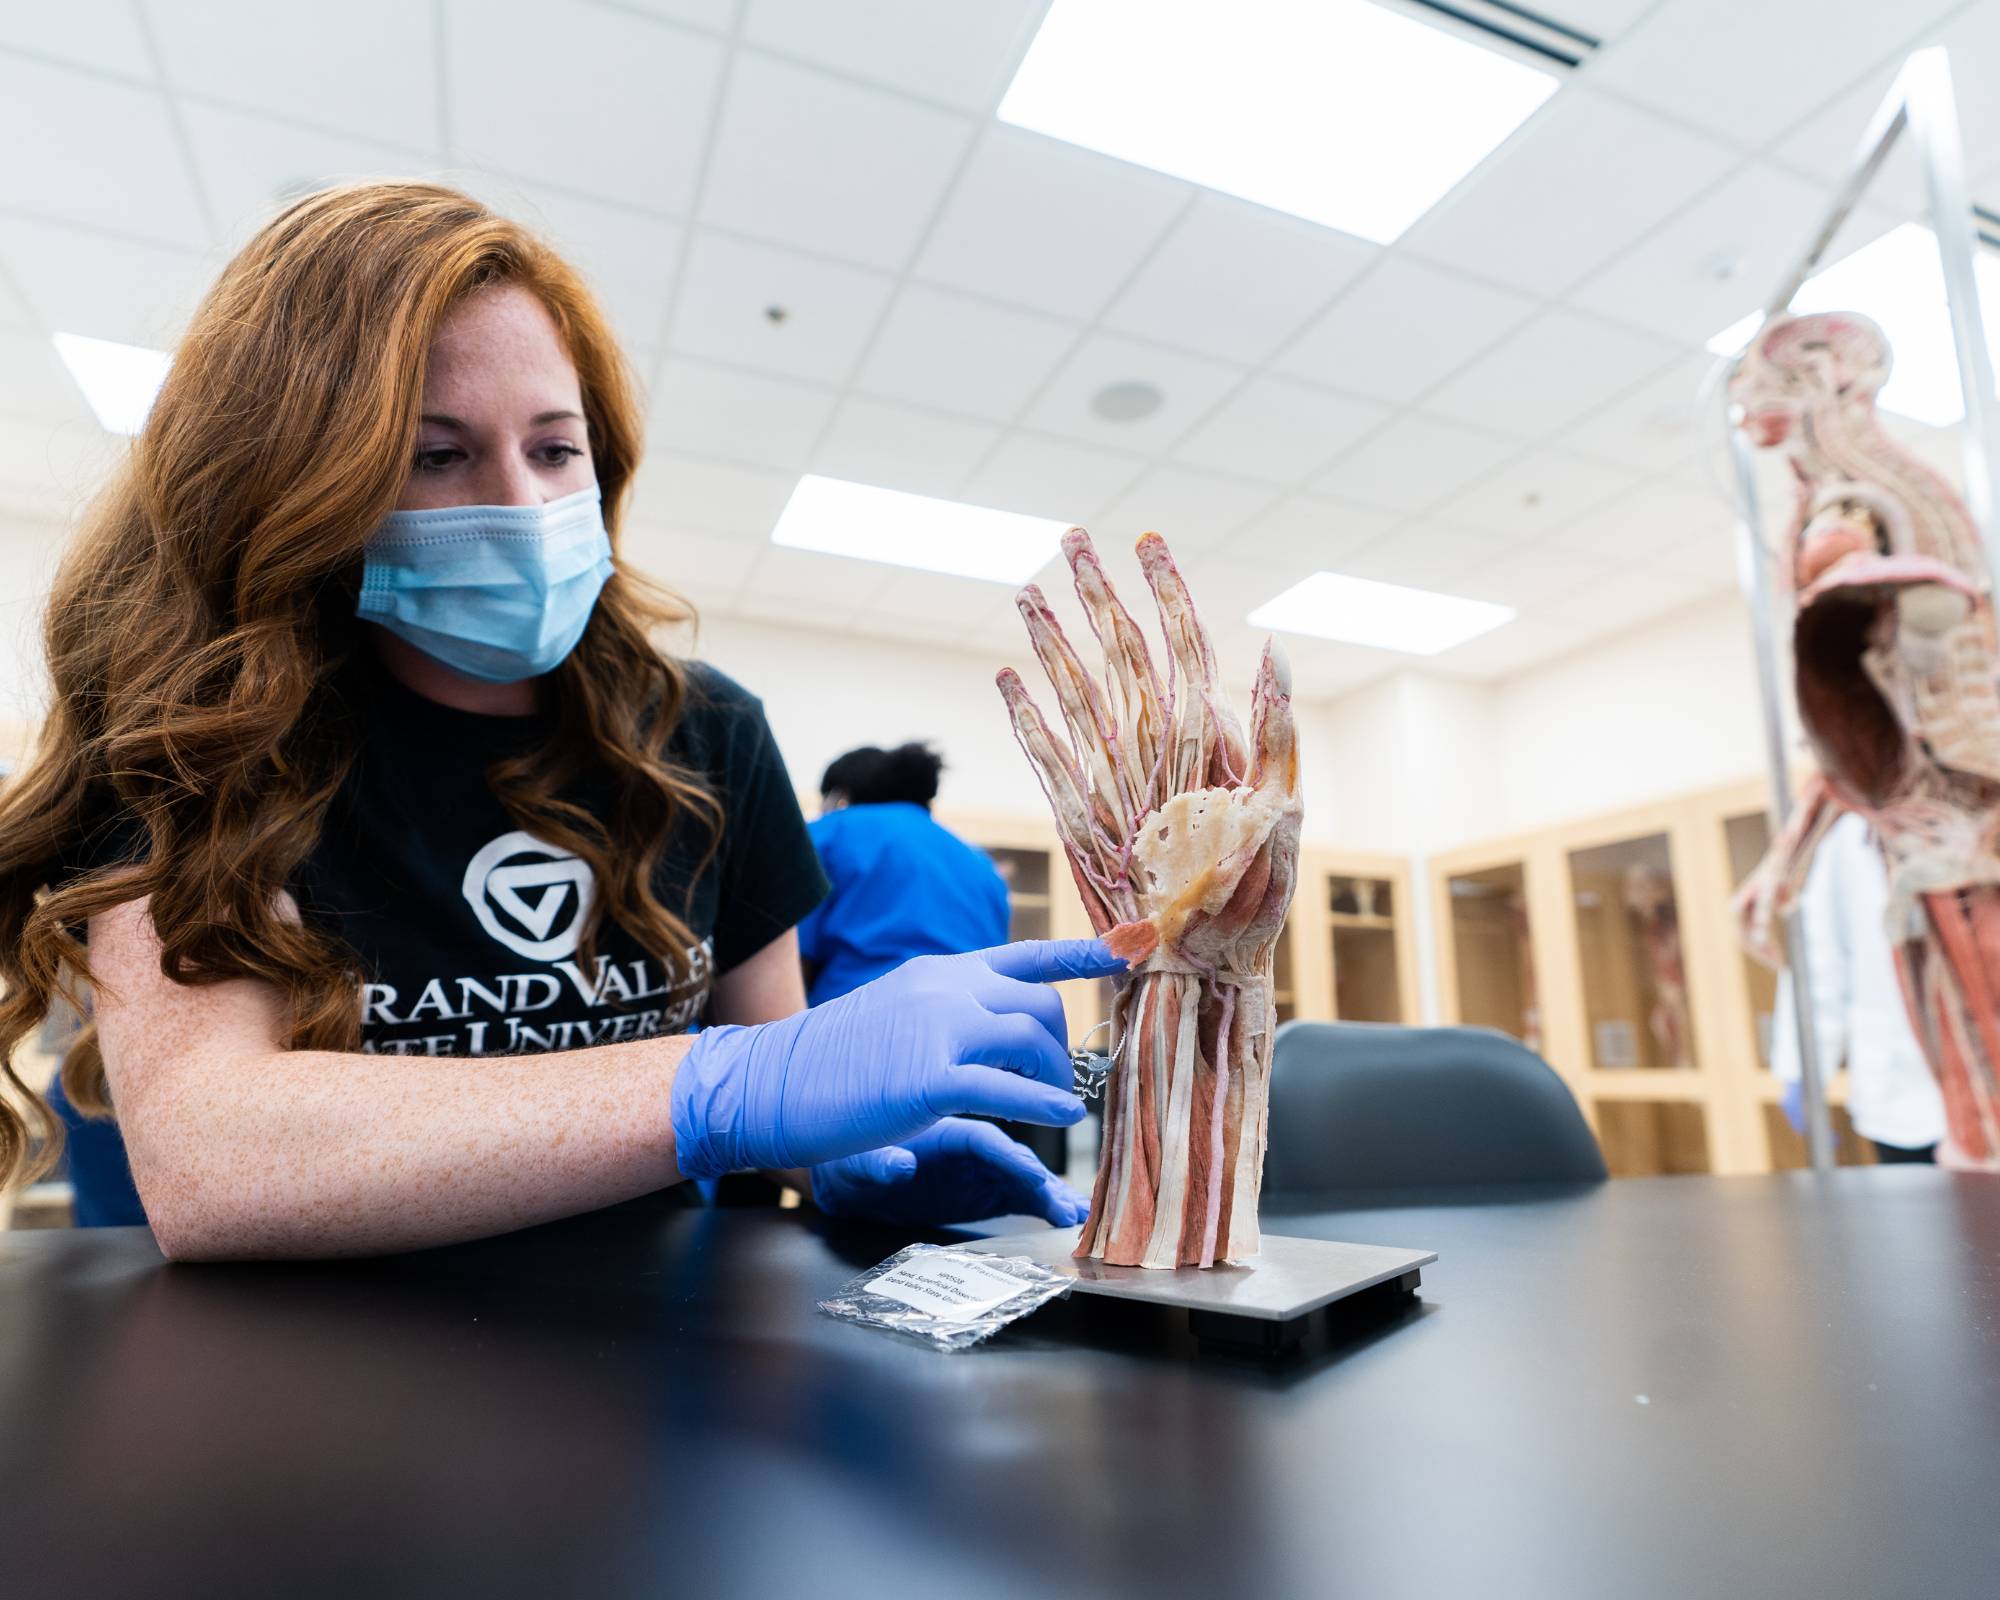 A medical student works with a model of a hand